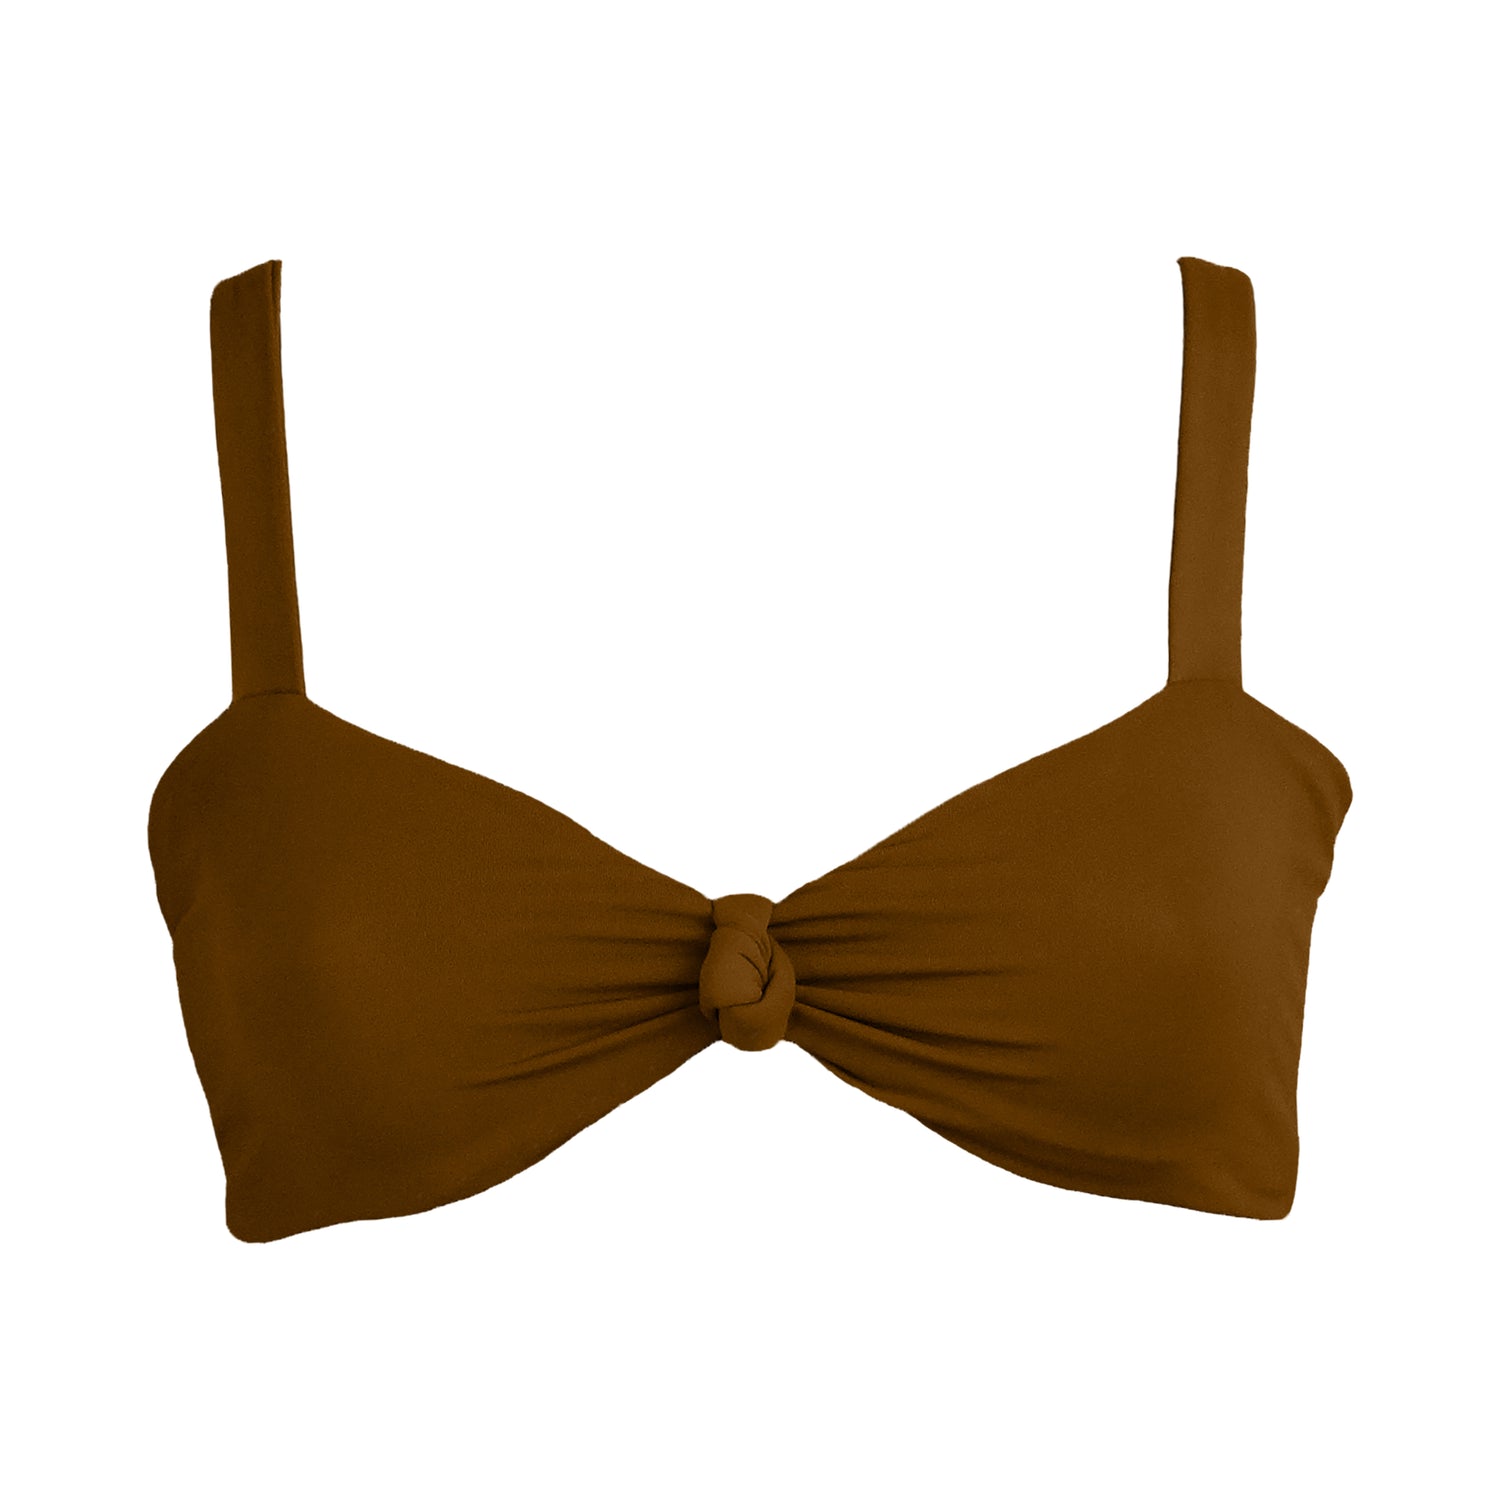 Clay Bralette style bikini top plunging knot v-neckline and adjustable tie back straps. 